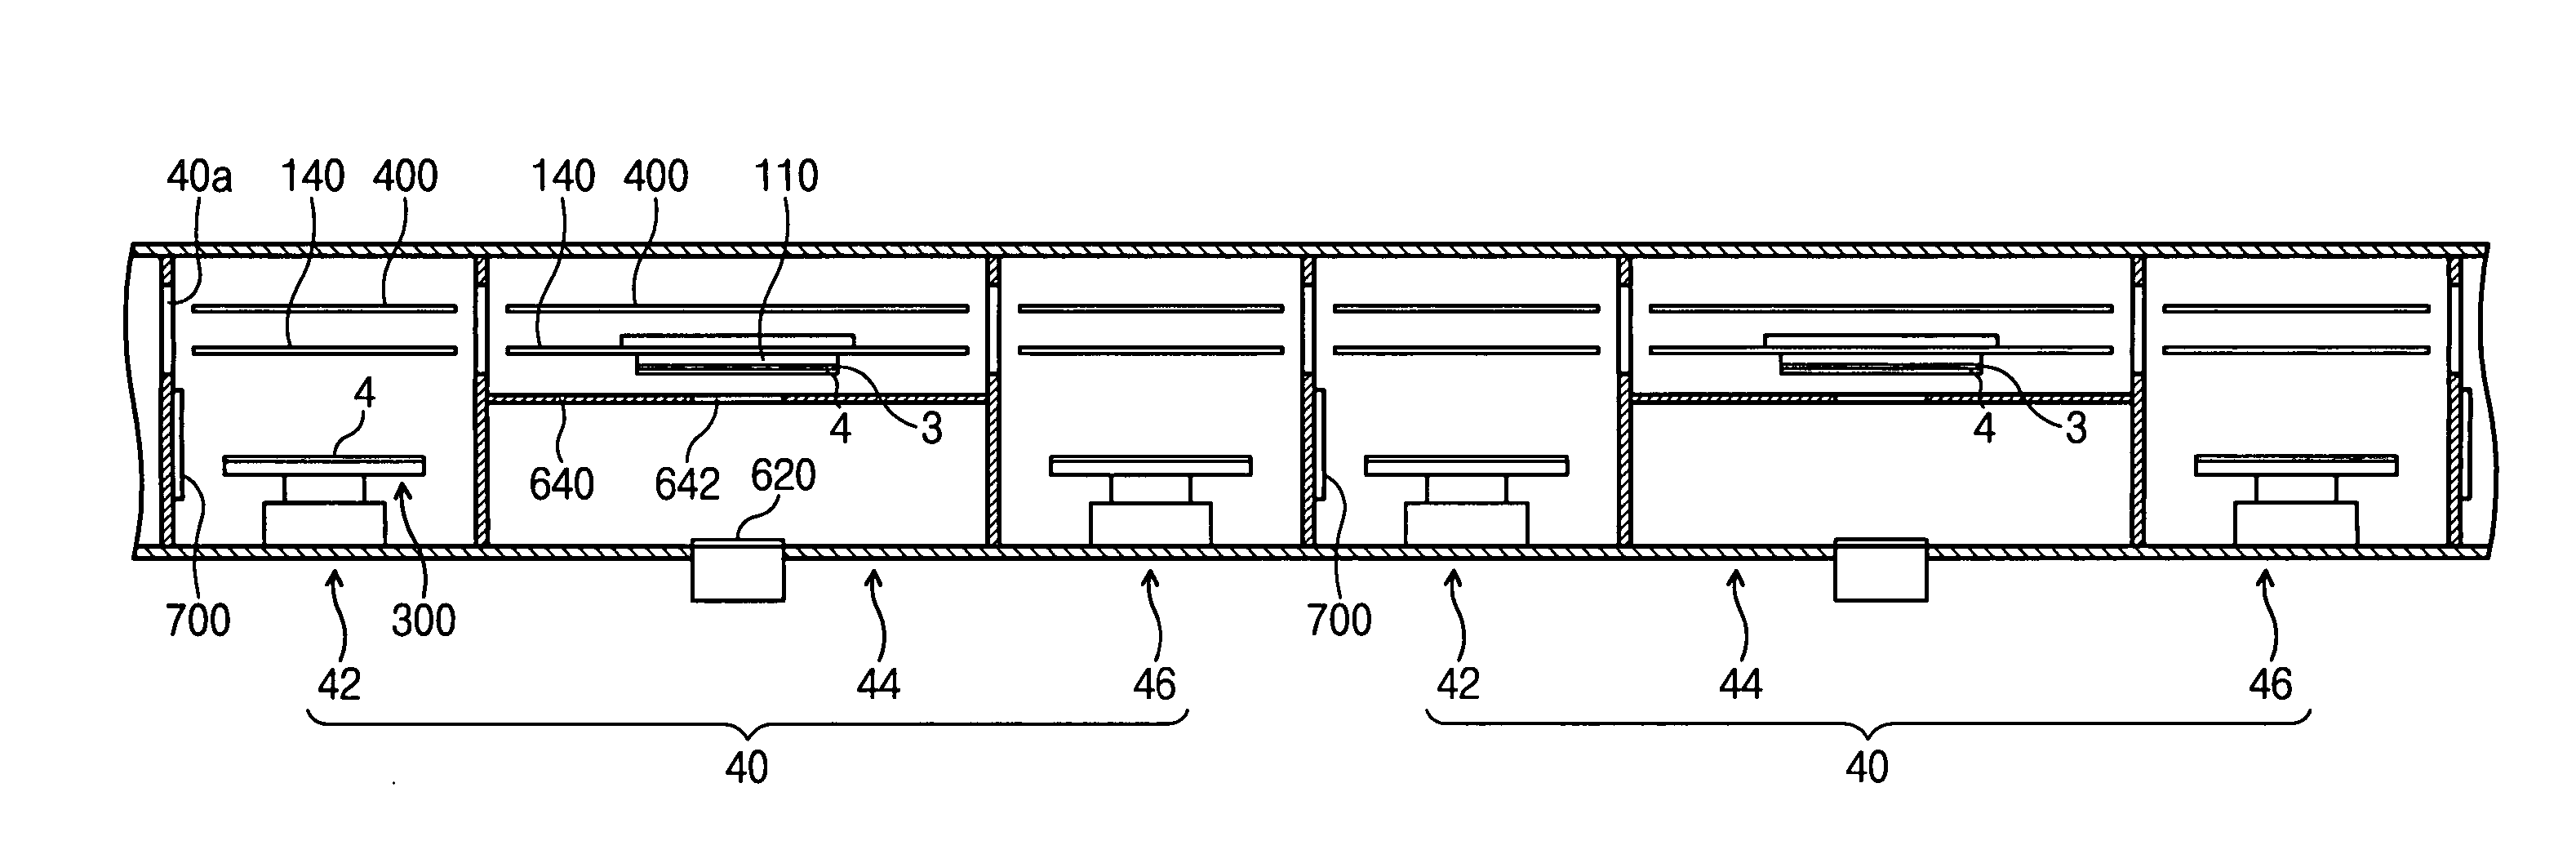 Apparatus for processing substrate